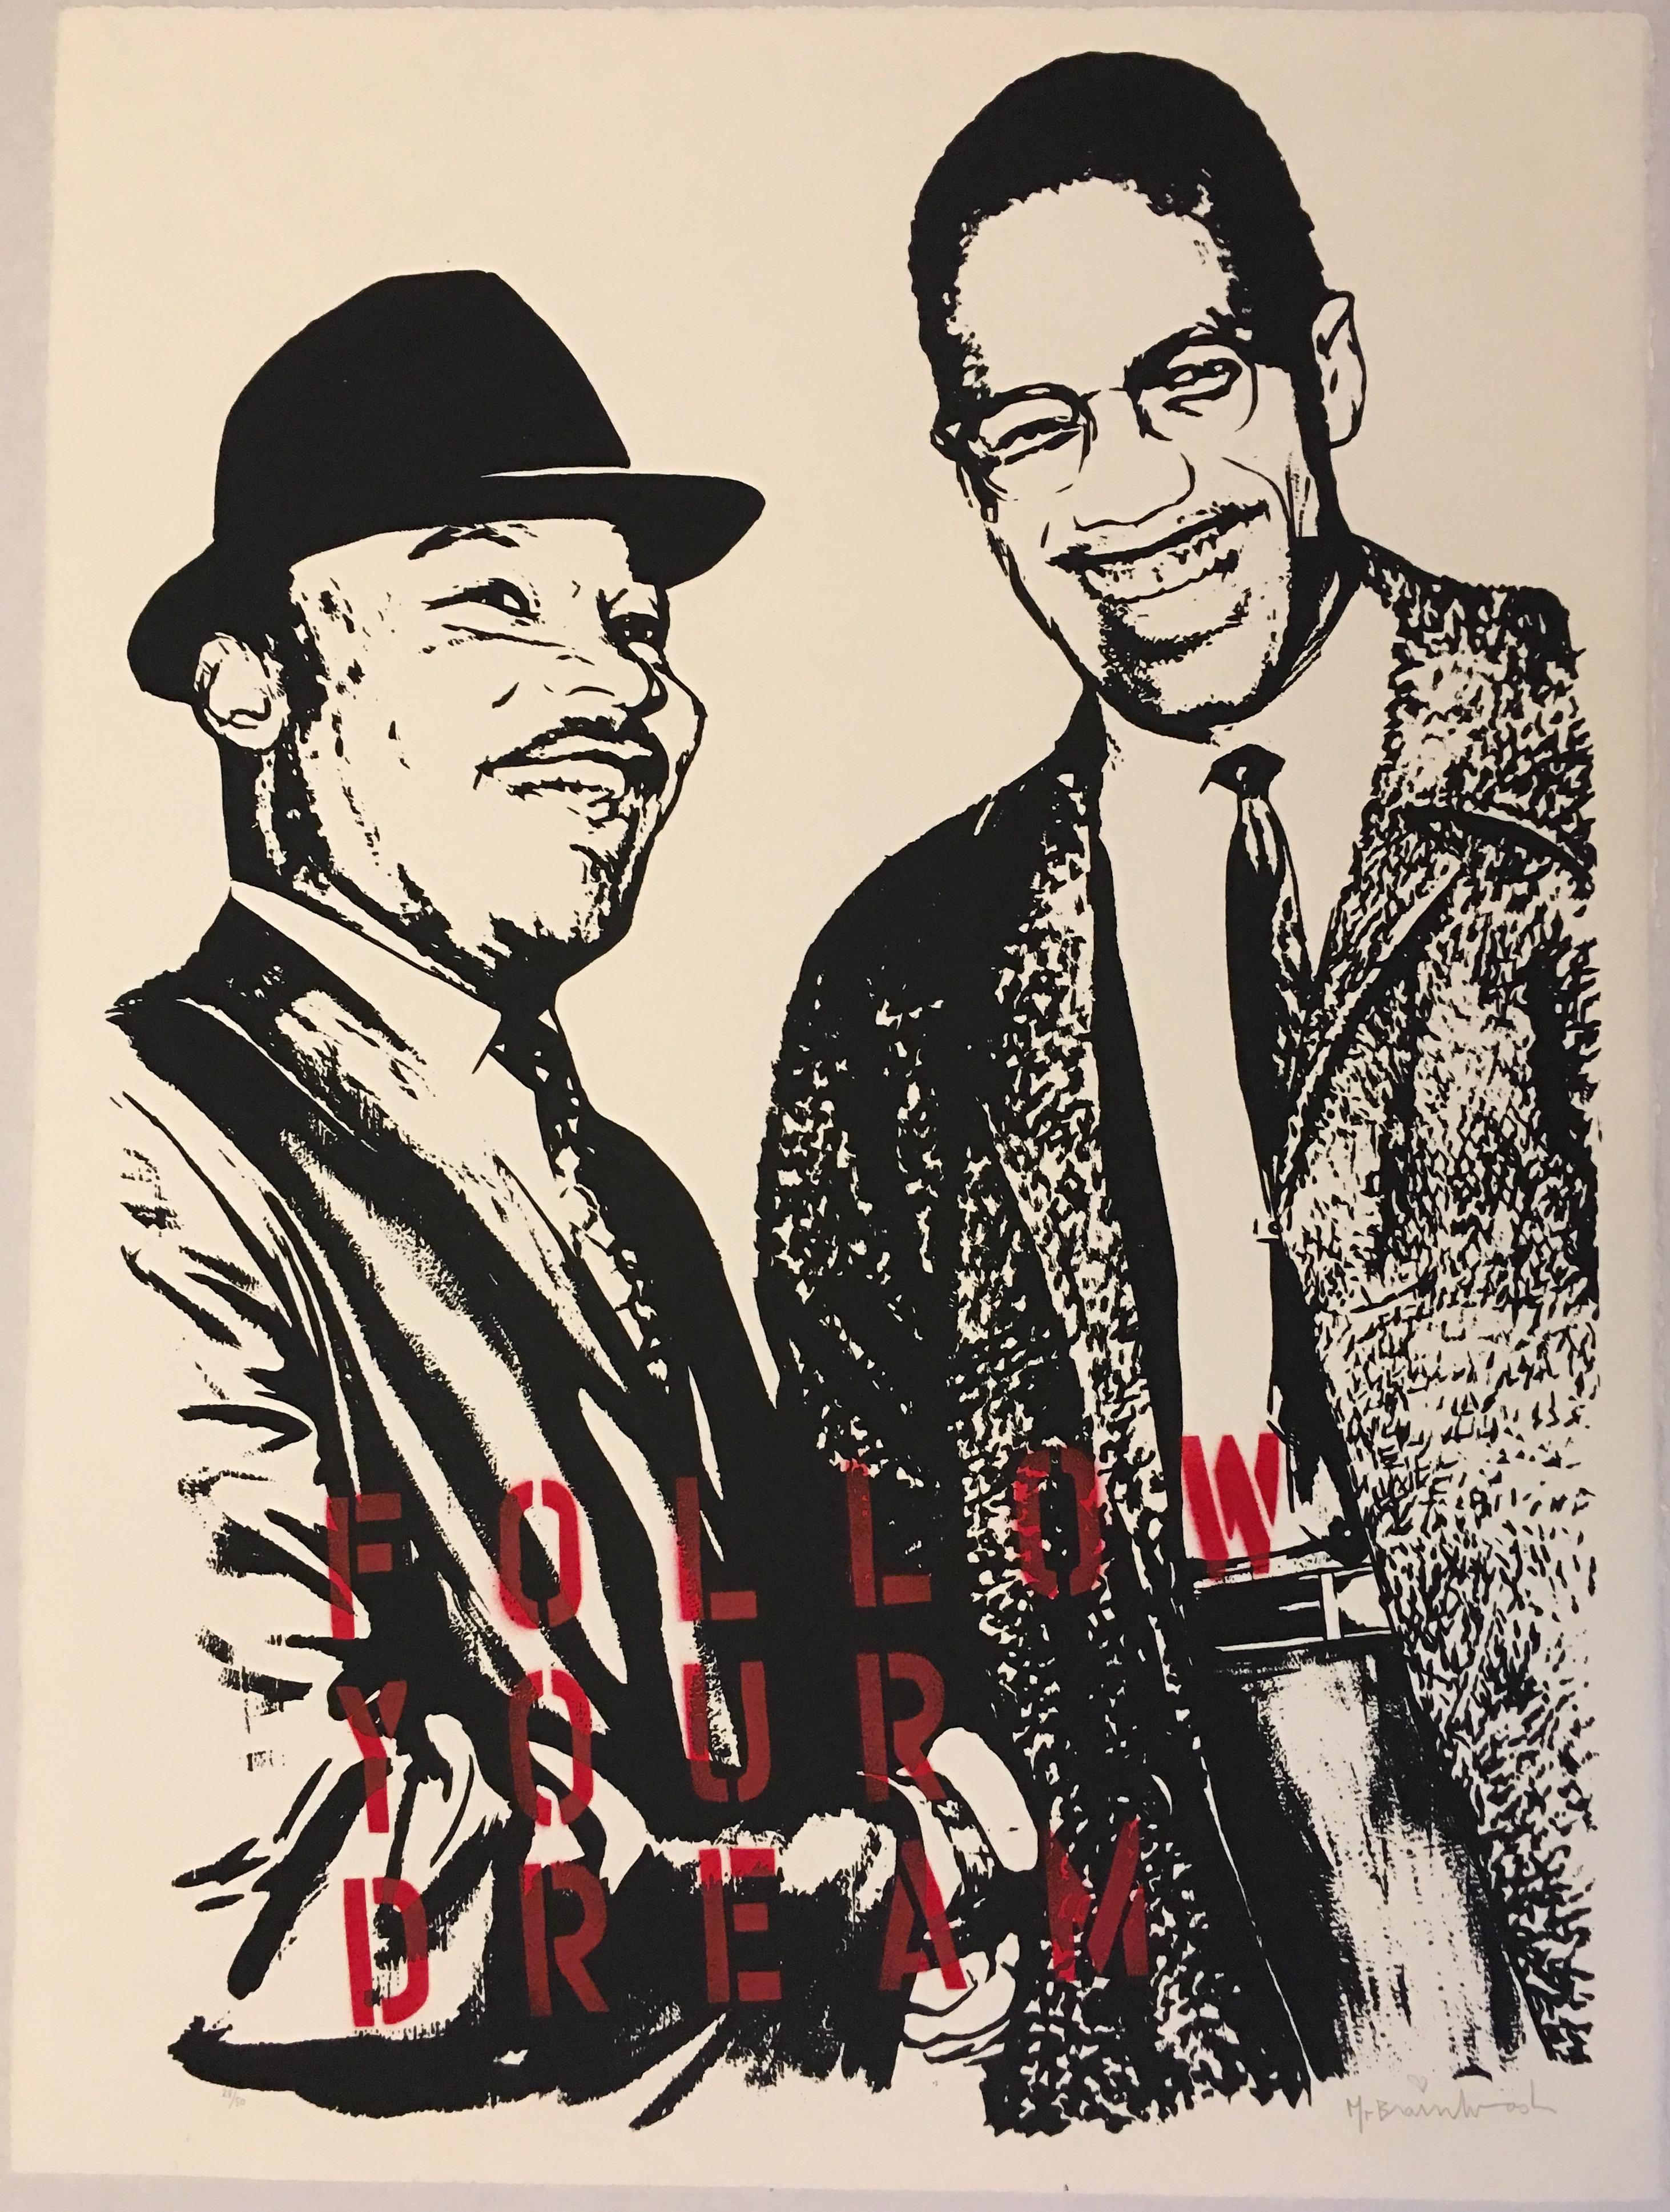 Follow Your Dream (Martin Luther King Jr. and Malcolm X)